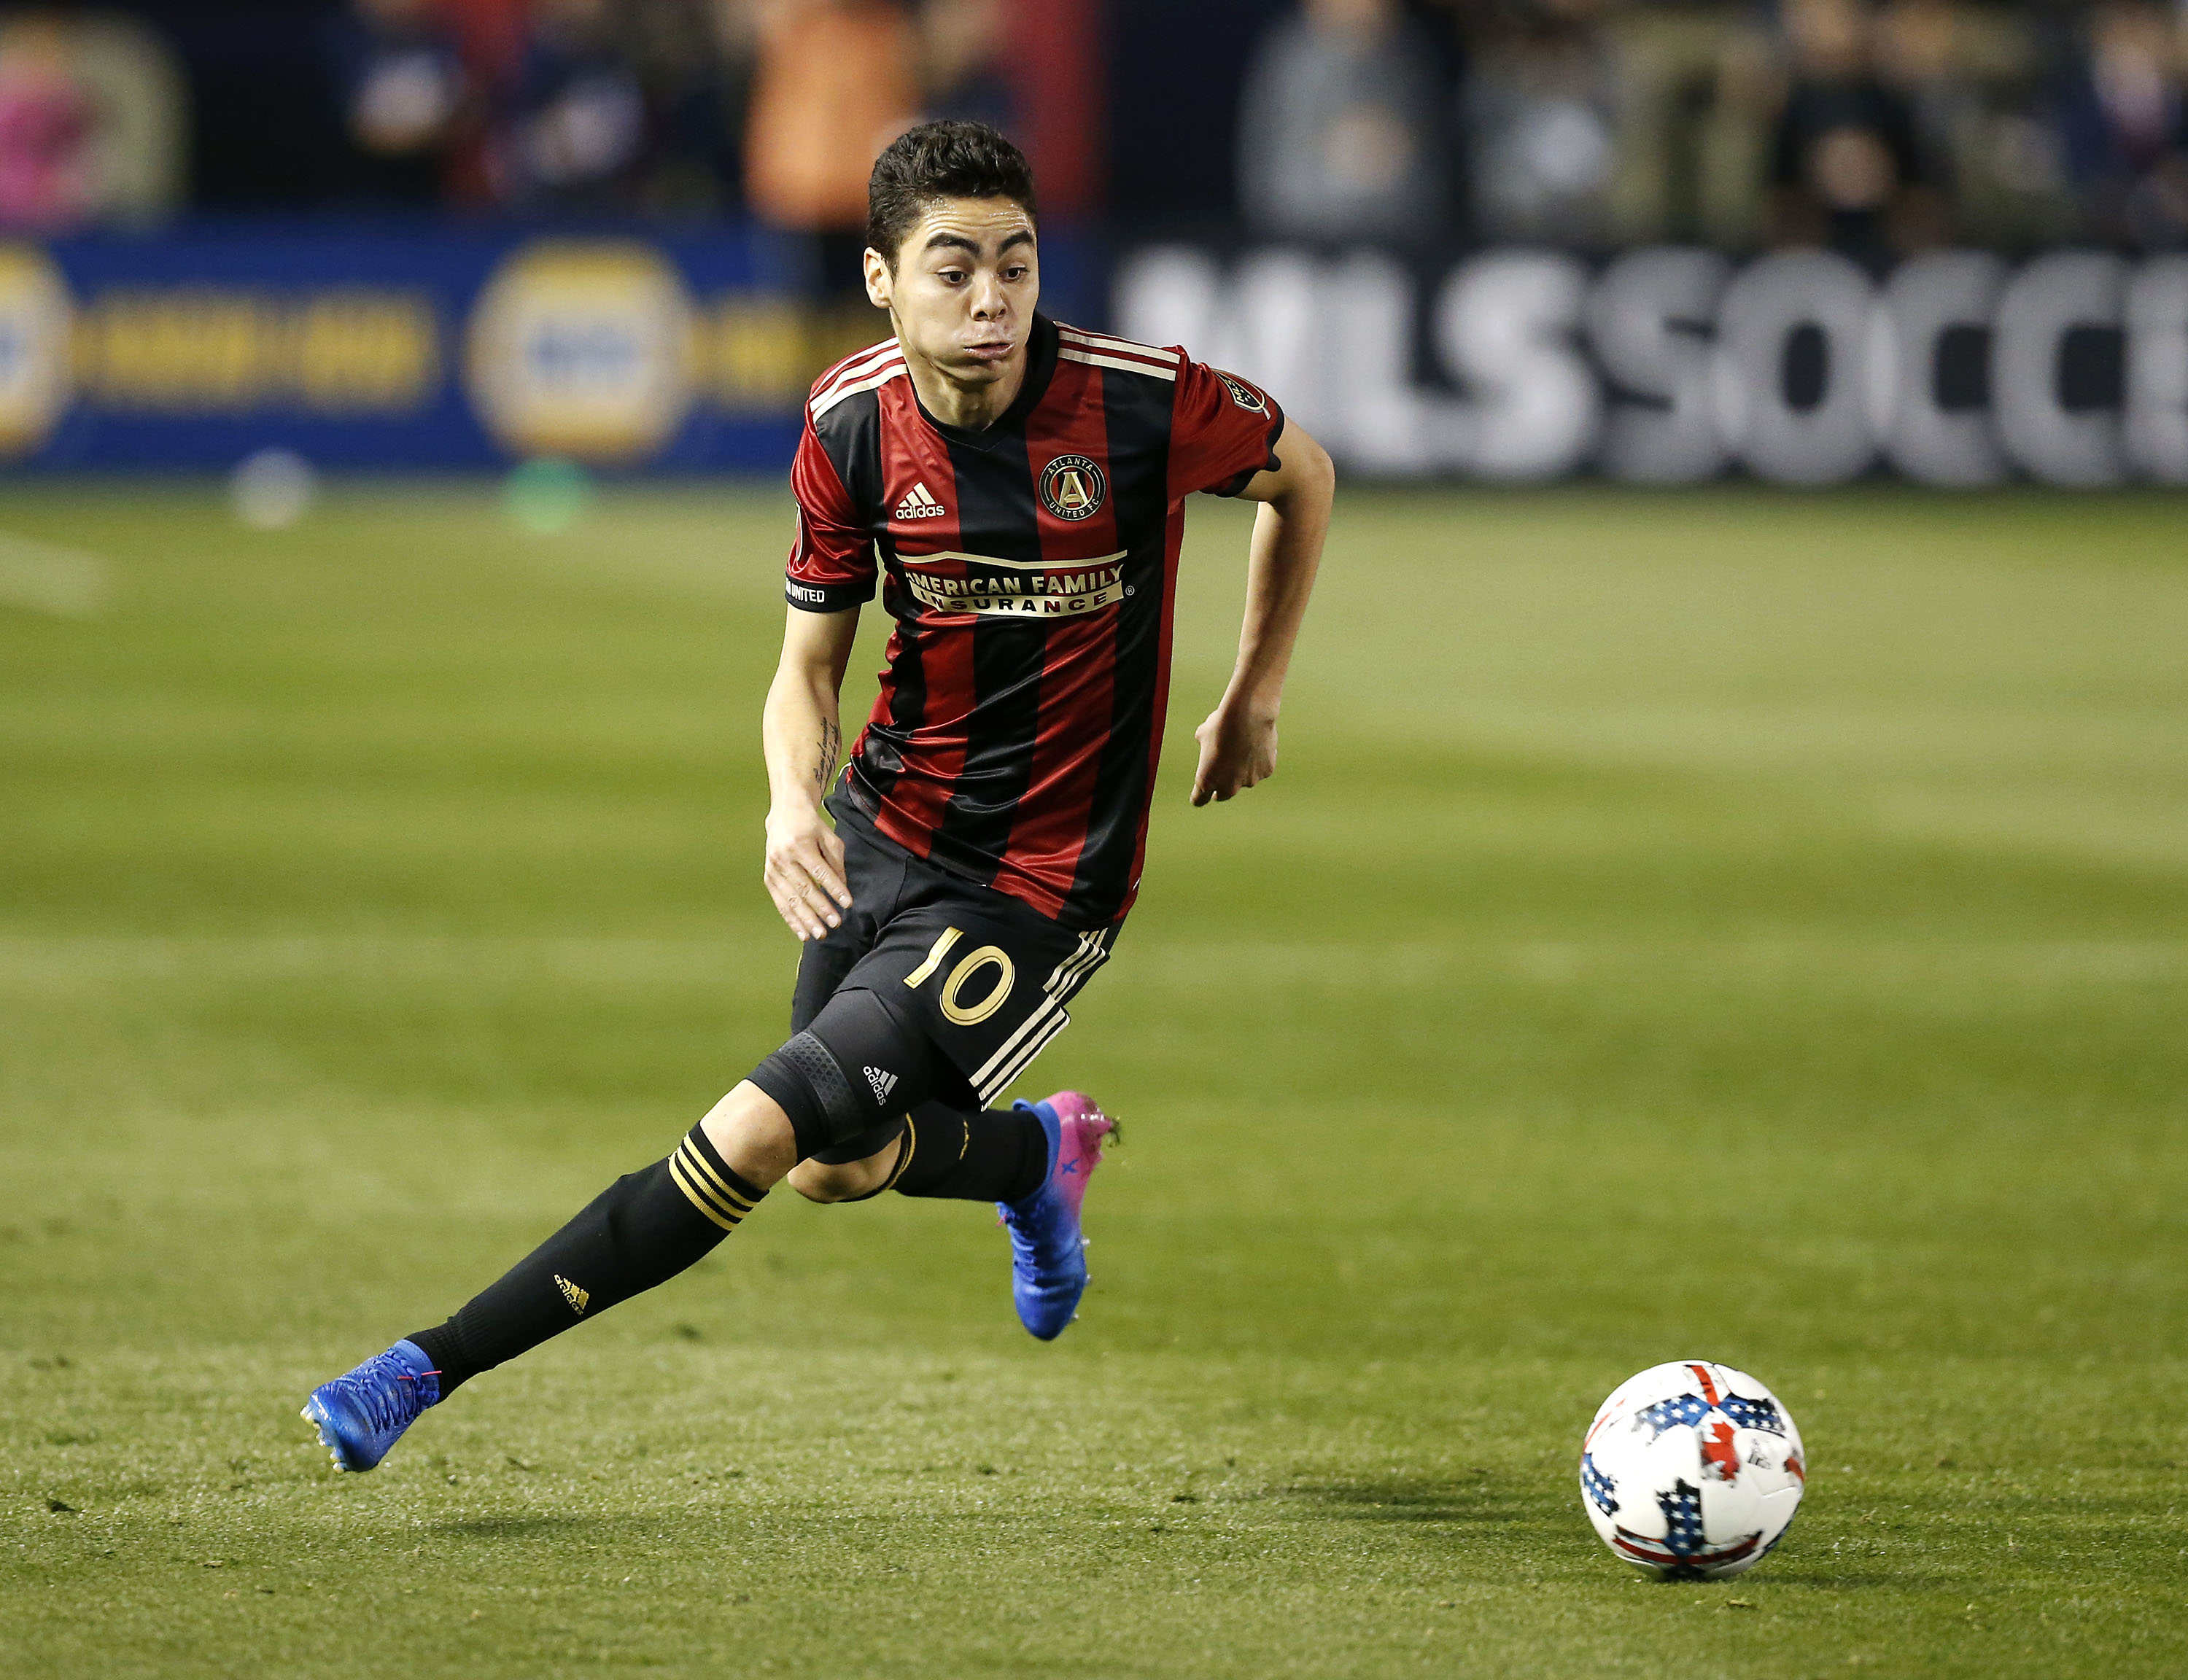 ATLANTA, GA - MARCH 05:  Midfielder Miguel Almiron #10 of Atlanta United dribbles during the game against the New York Red Bulls at Bobby Dodd Stadium on March 5, 2017 in Atlanta, Georgia.  (Photo by Mike Zarrilli/Getty Images)